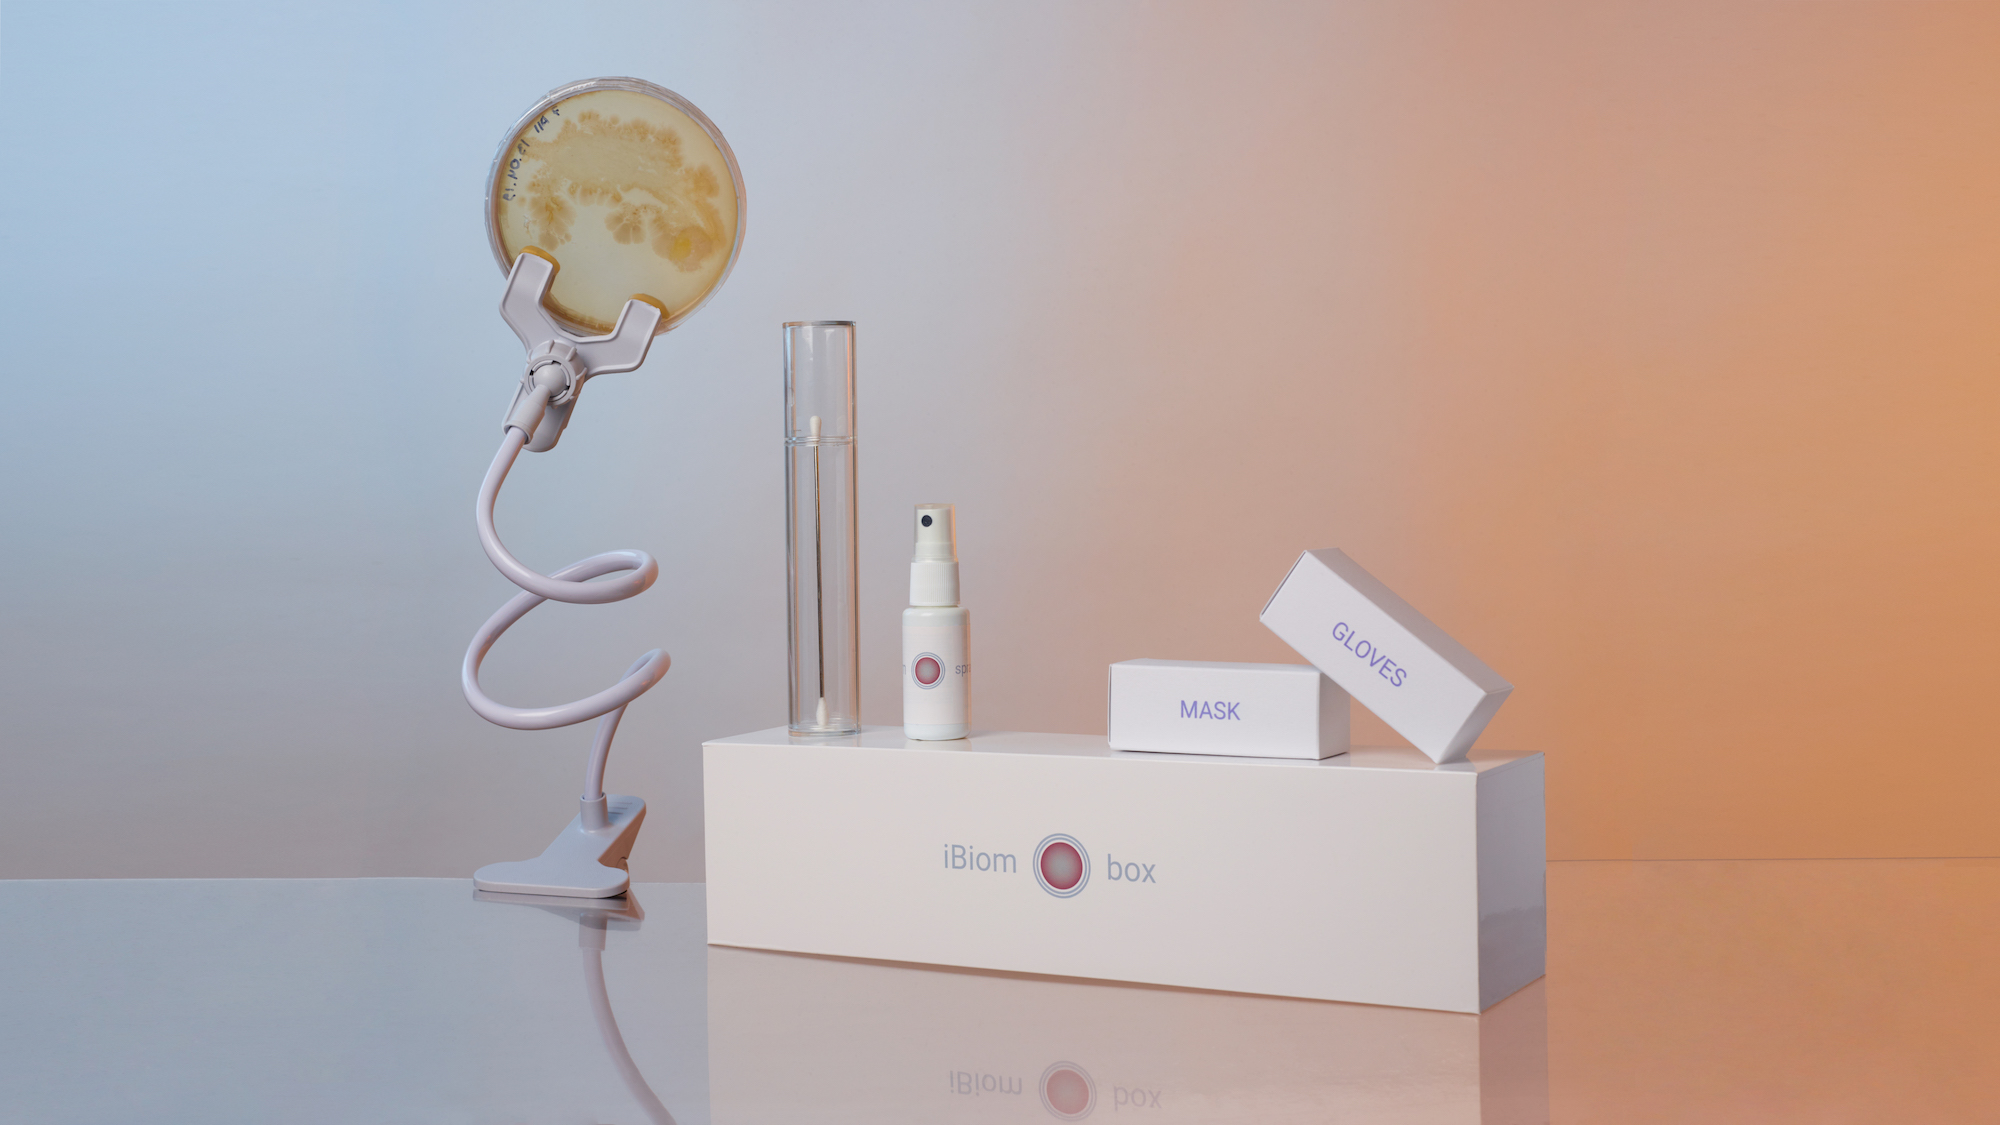 The company’s first product was iBiom box. This service asked the user to gather bacteria from their smartphone screen and send them to iBiom, where the data was analysed and turned into personalised solutions for smartphone and life in general